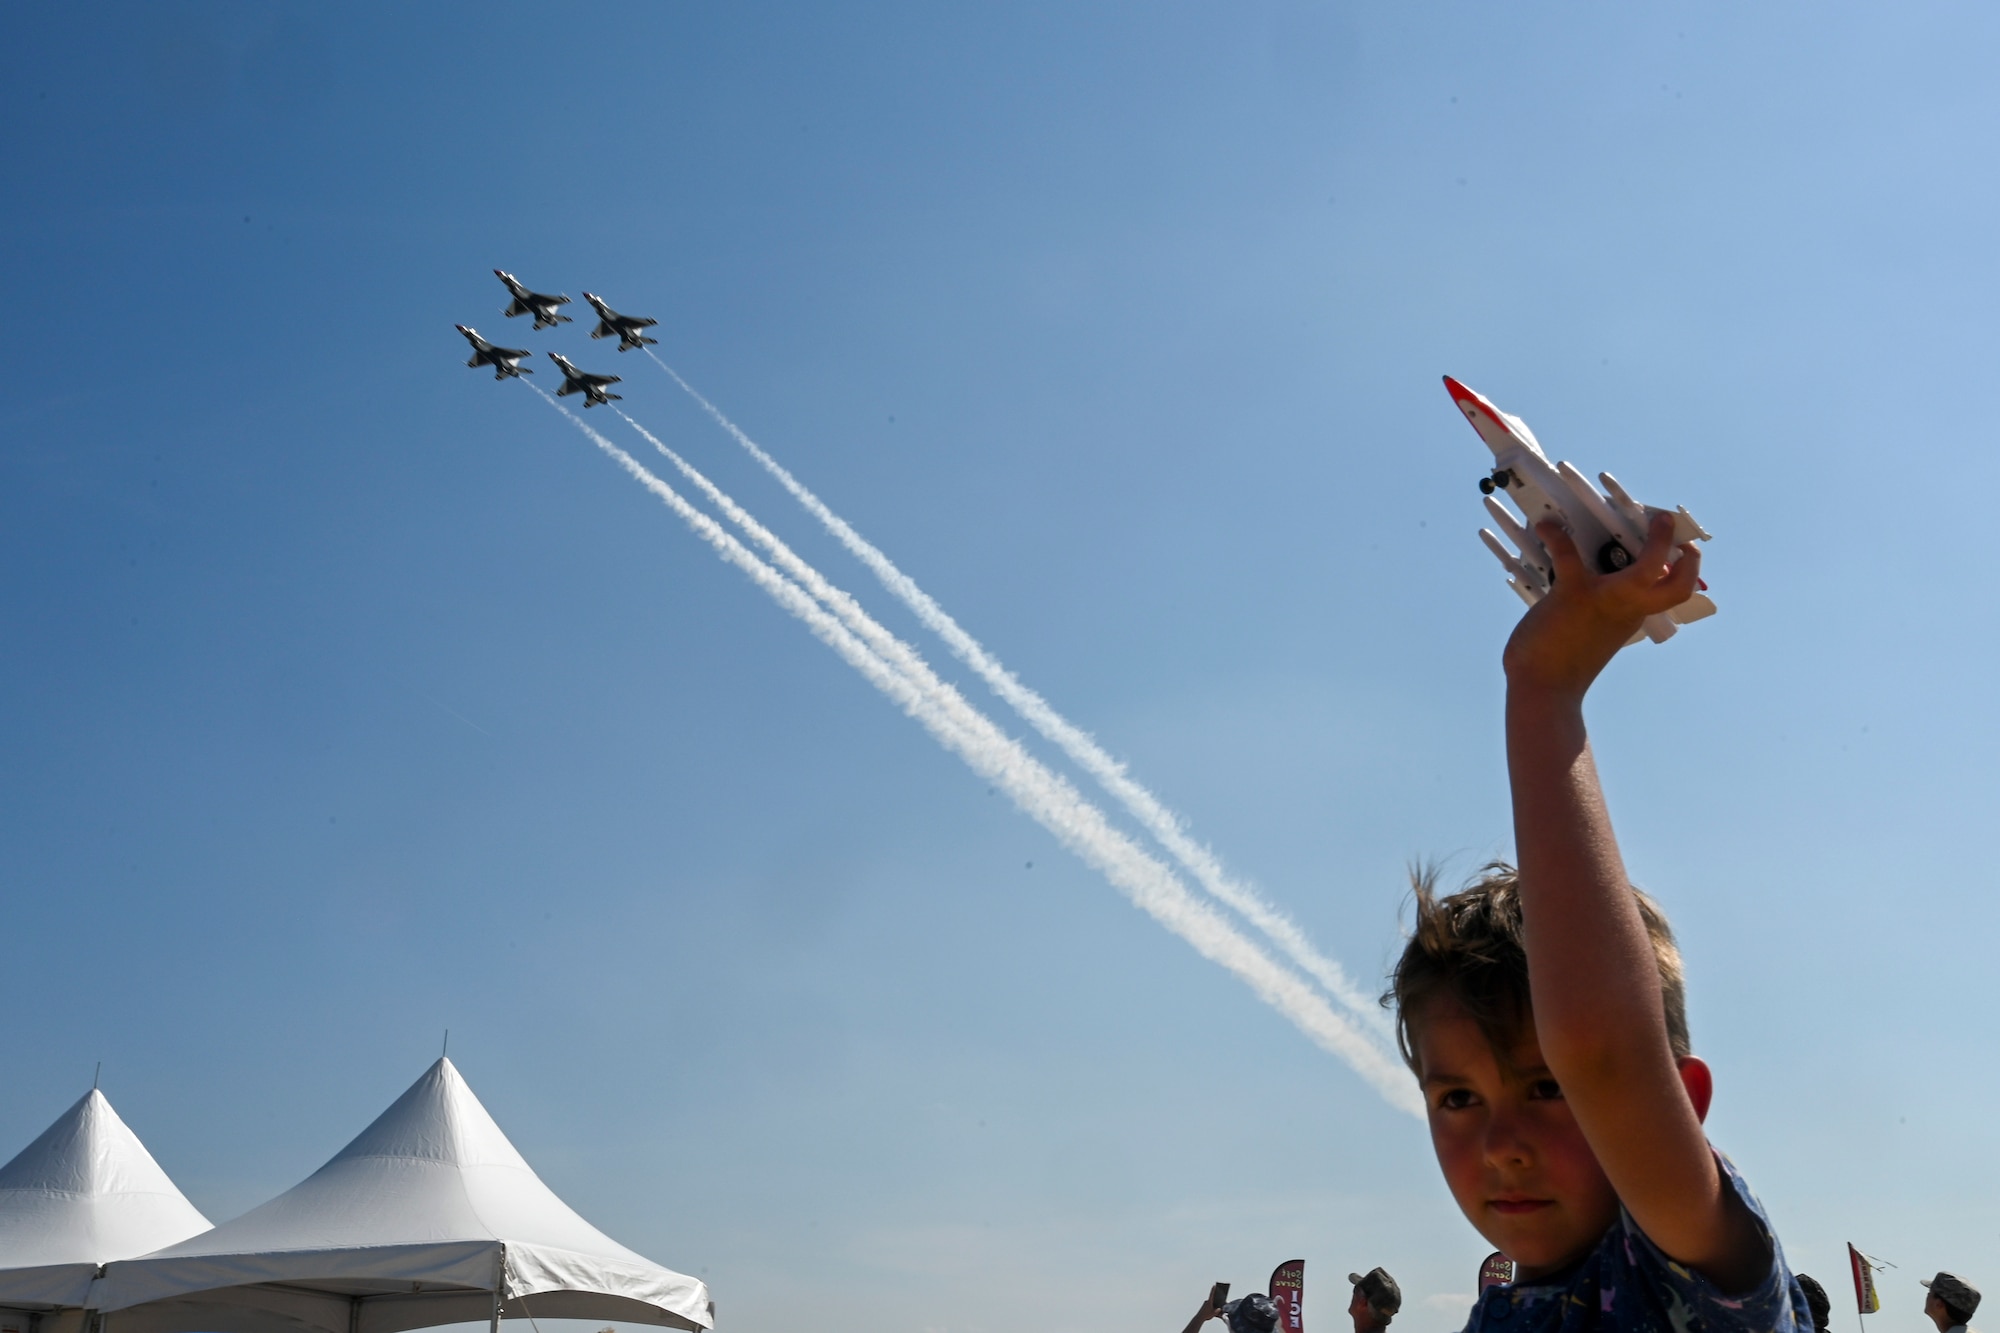 A child watches the U.S. Air Force Thunderbirds while playing with a Thunderbird toy during the first day of the 2022 Thunder Over Dover Airshow, May 21, 2022, at Dover Air Force Base, Delaware. The Thunderbirds performed precision flying maneuvers during the 2022 Thunder Over Dover Open House and Airshow May 21-22. (U.S. Air Force photo by Staff Sgt. Sabatino DiMascio)